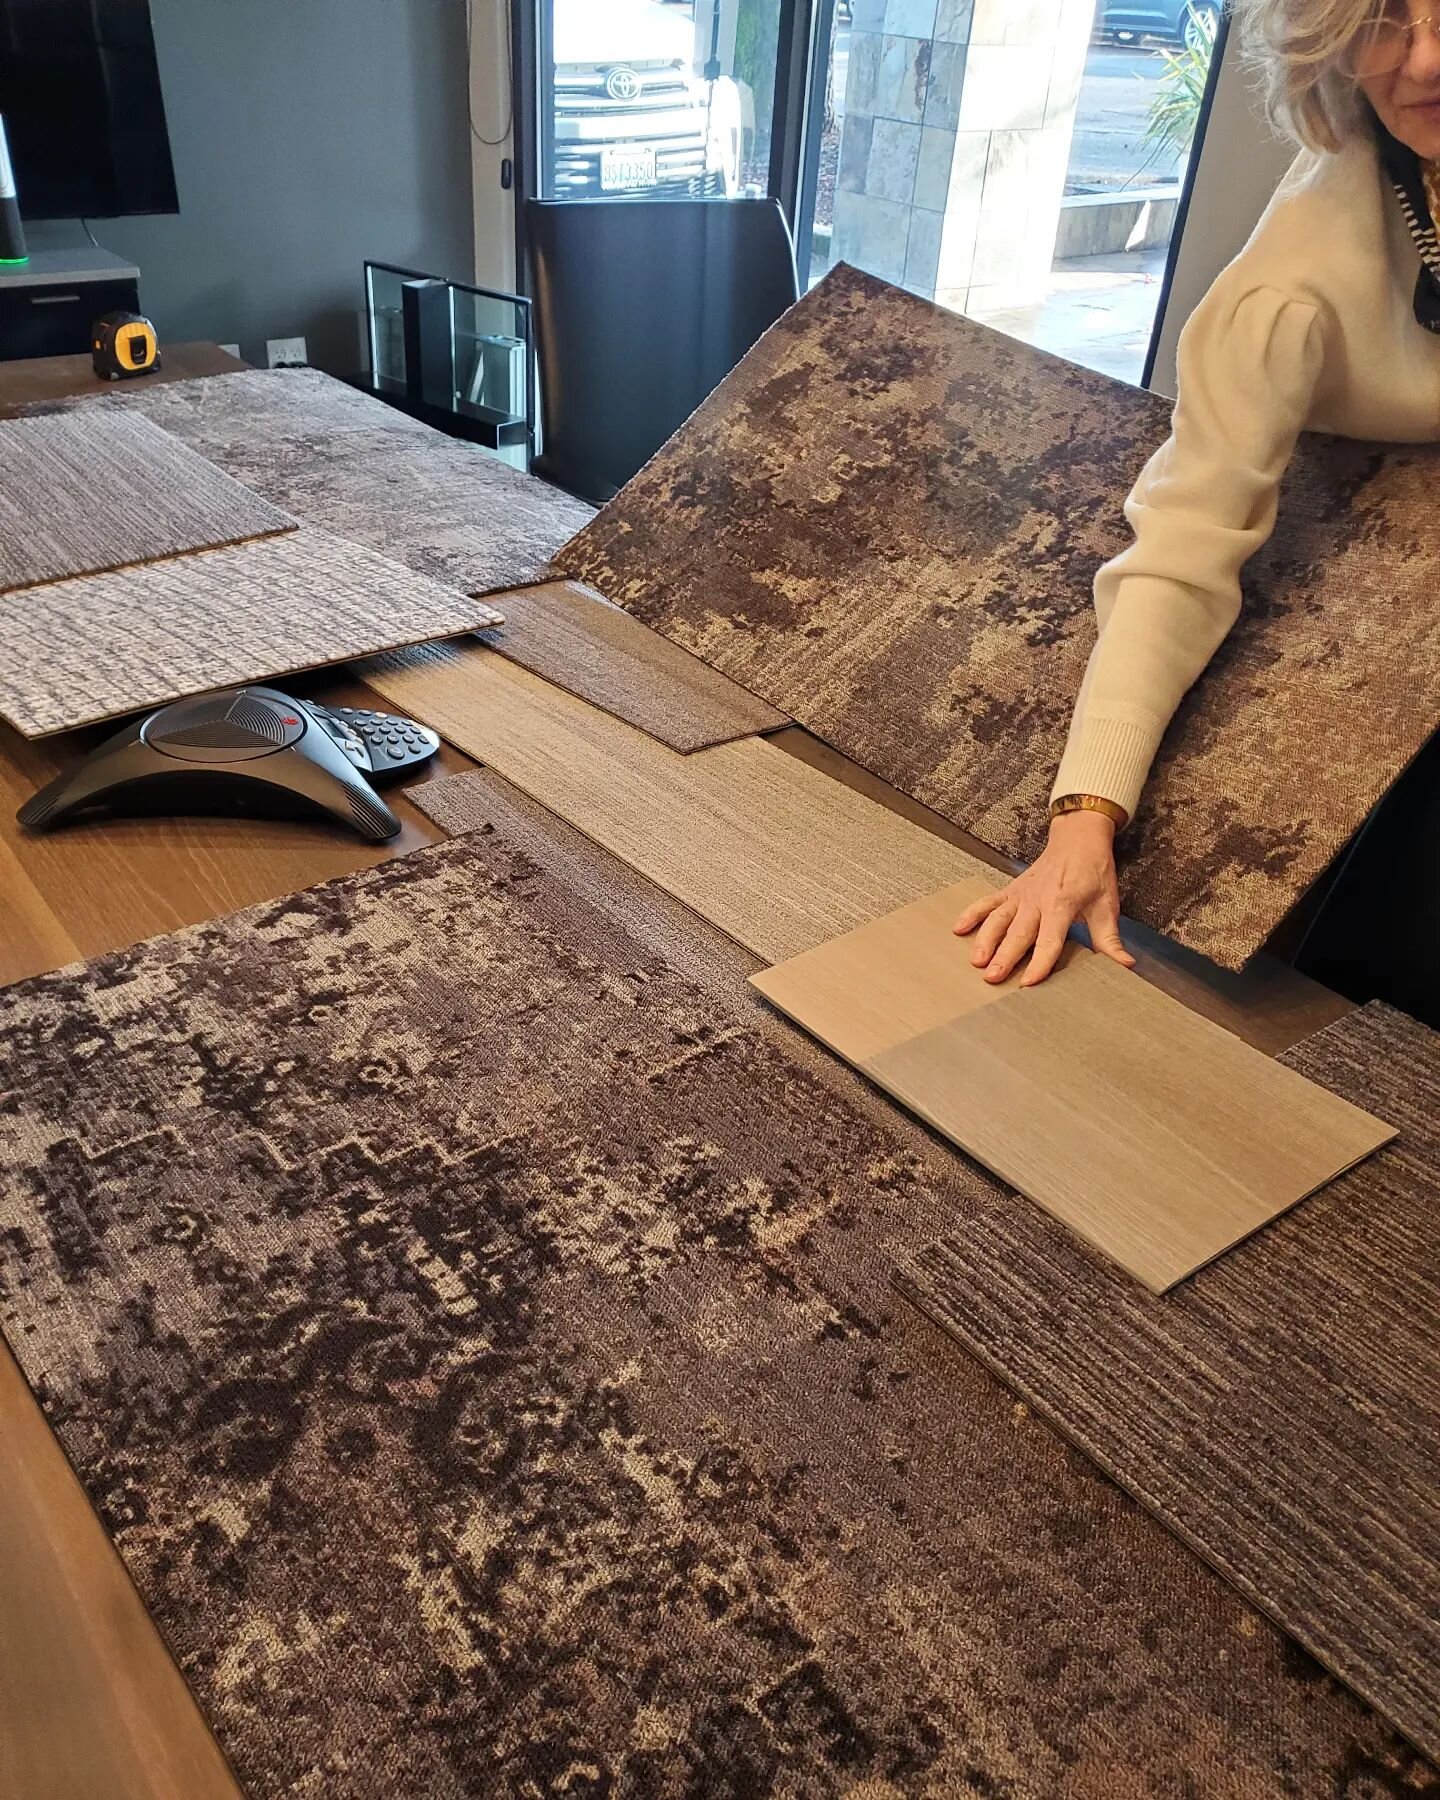 Always love having our favorite reps pop in to show us the latest and greatest. Thanks for swinging by today @j.schwalbach_millikenfloors !

#interiordesign #seattledesign #milliken #newproductalert #carpettile #libraryupdate